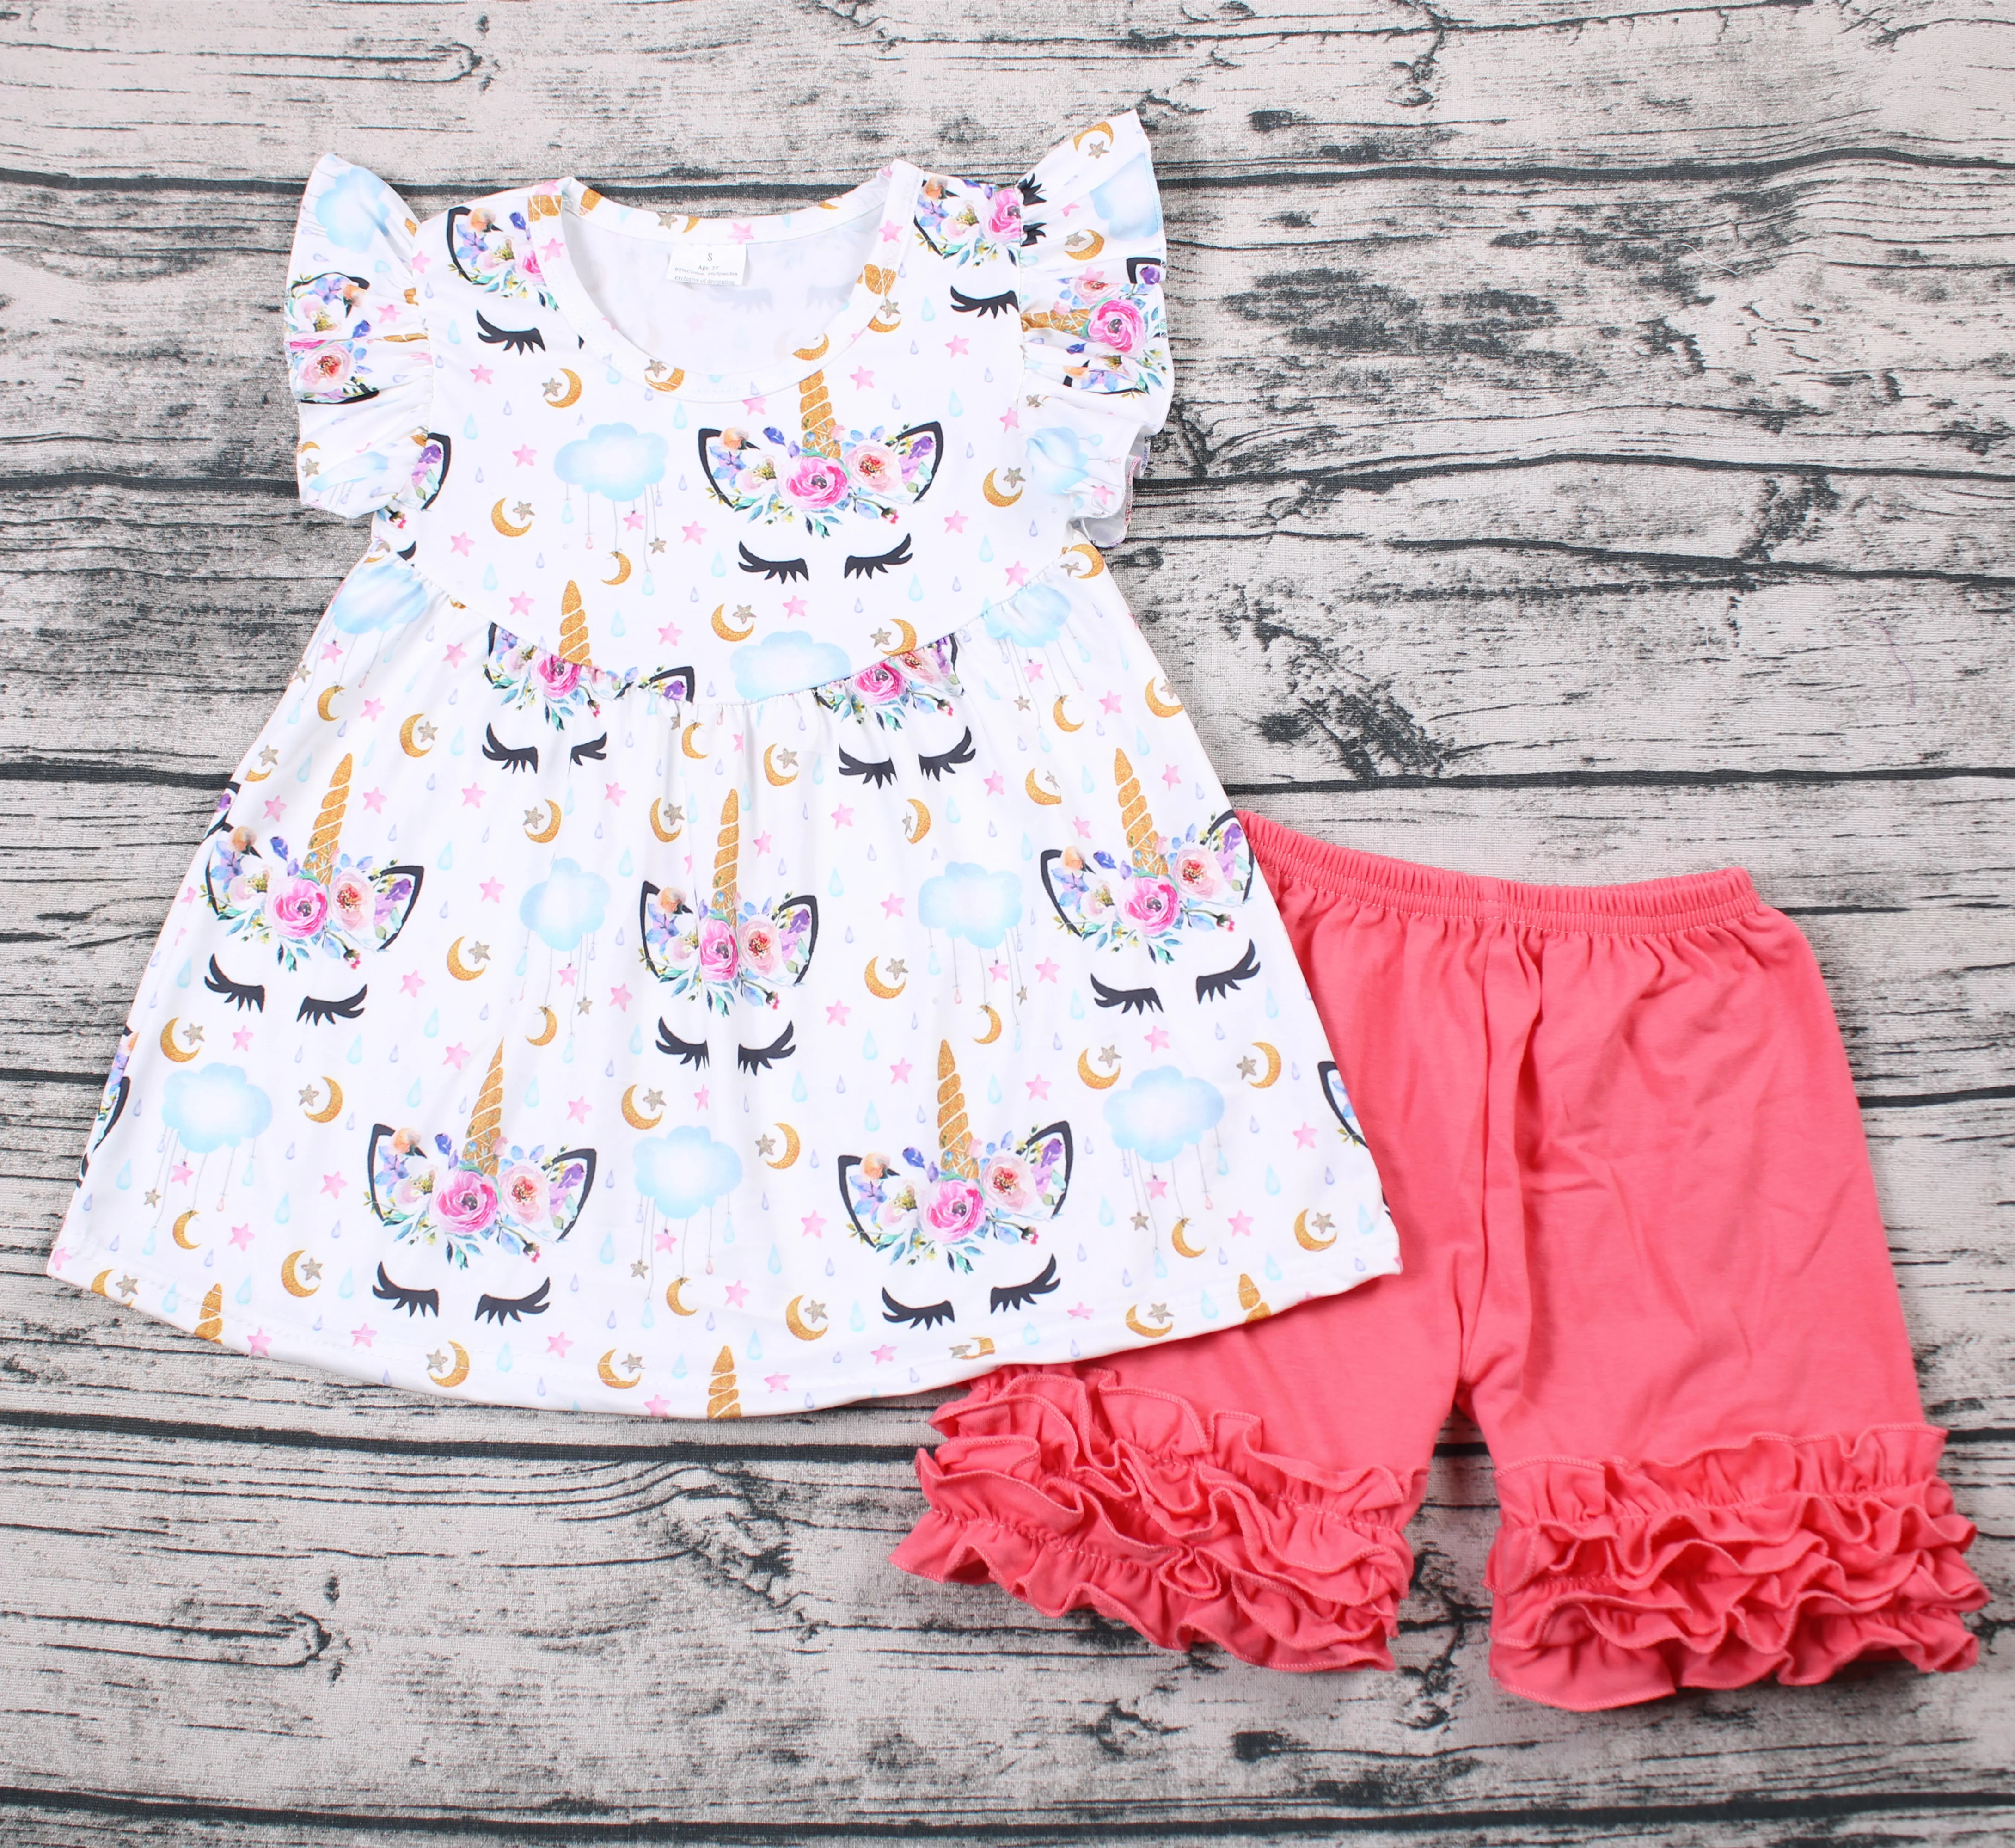 

Adorable Baby Girls Summer Boutique Outfit Cute Unicorn Short Flutter Sleeve Tunic Top Wit Red Icing Shorts Suit Clothes Set